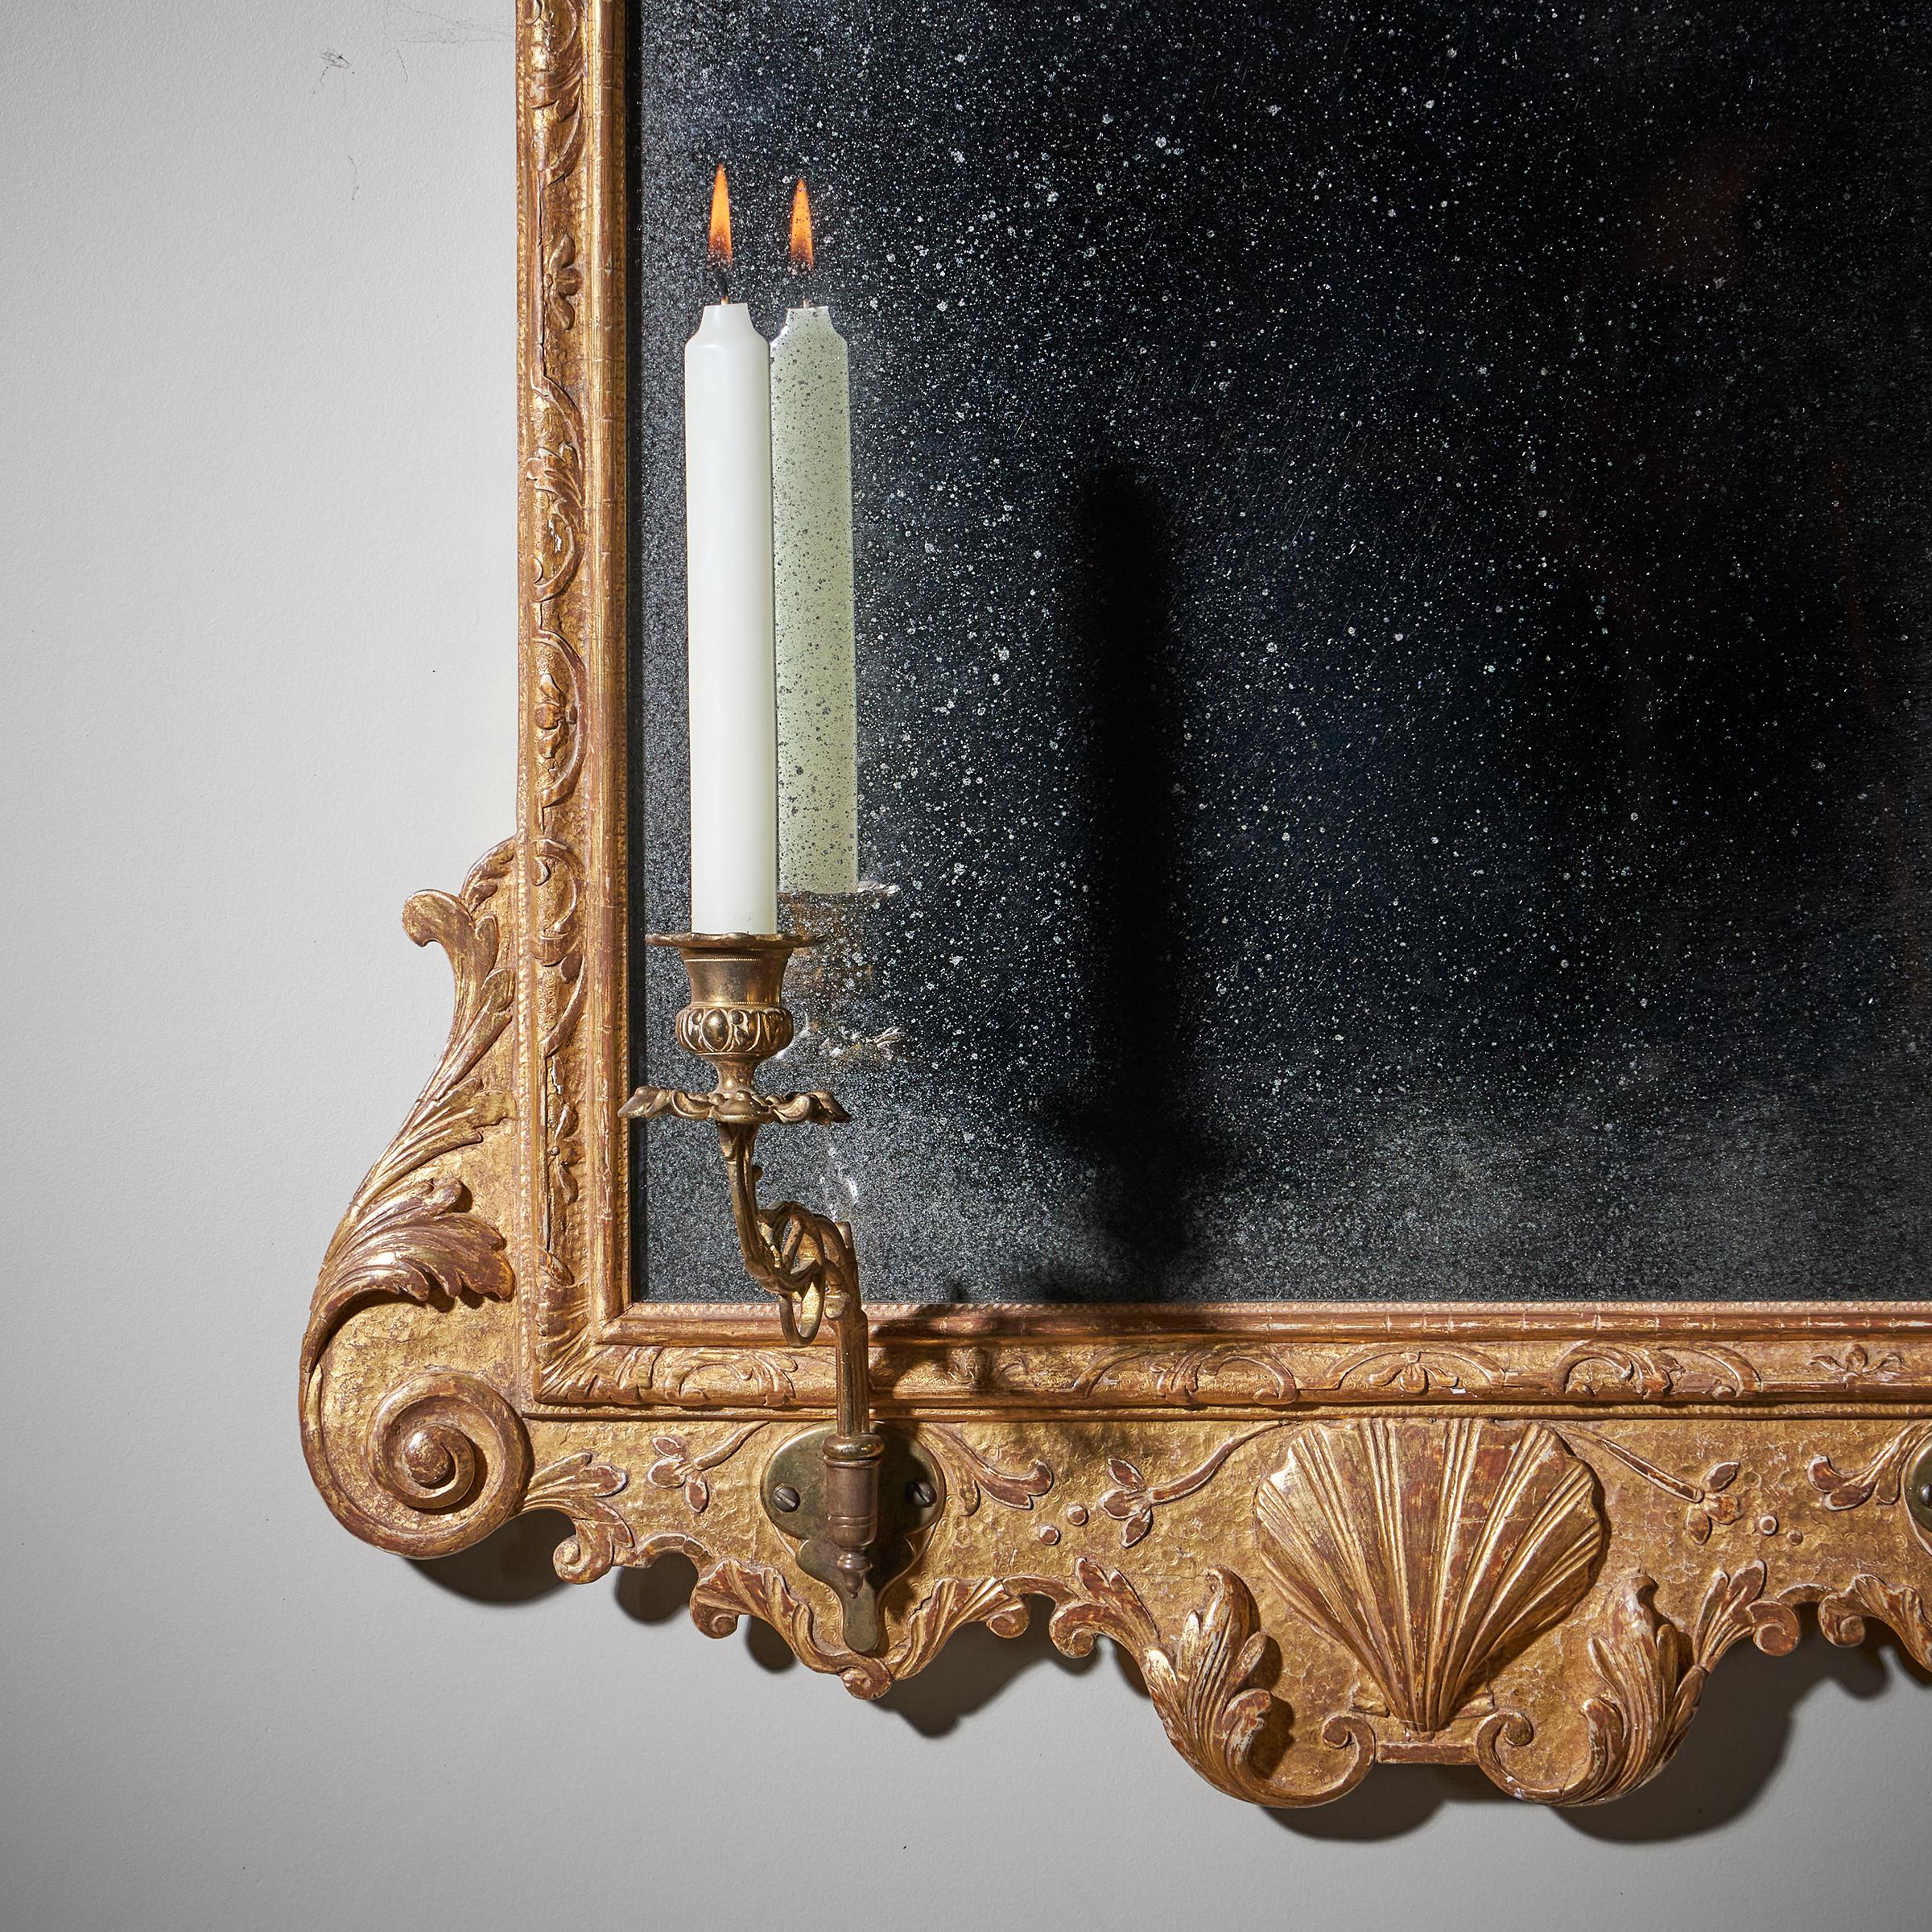 English Fine 18th Century George I Gilt Gesso Pier or Console Mirror, Manner of Belchier For Sale